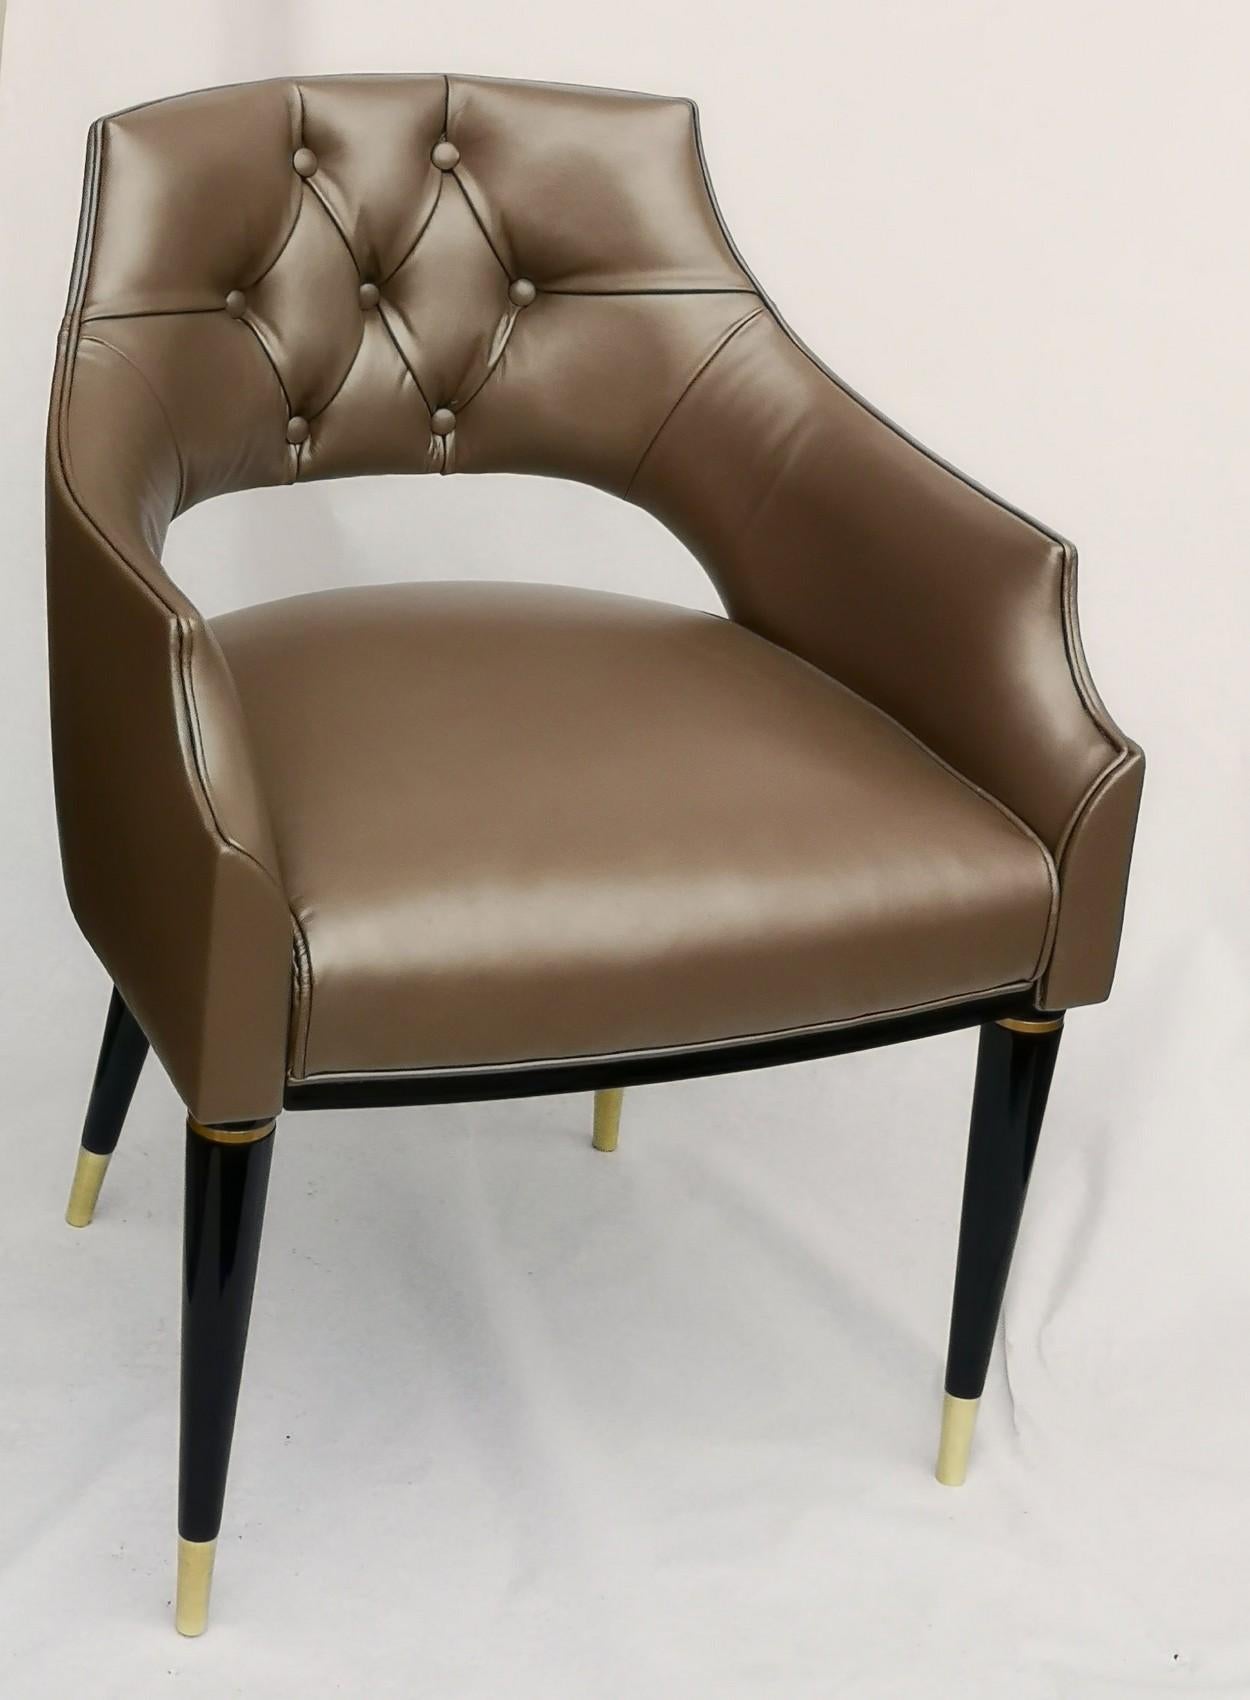 comfortable dining chairs with arms